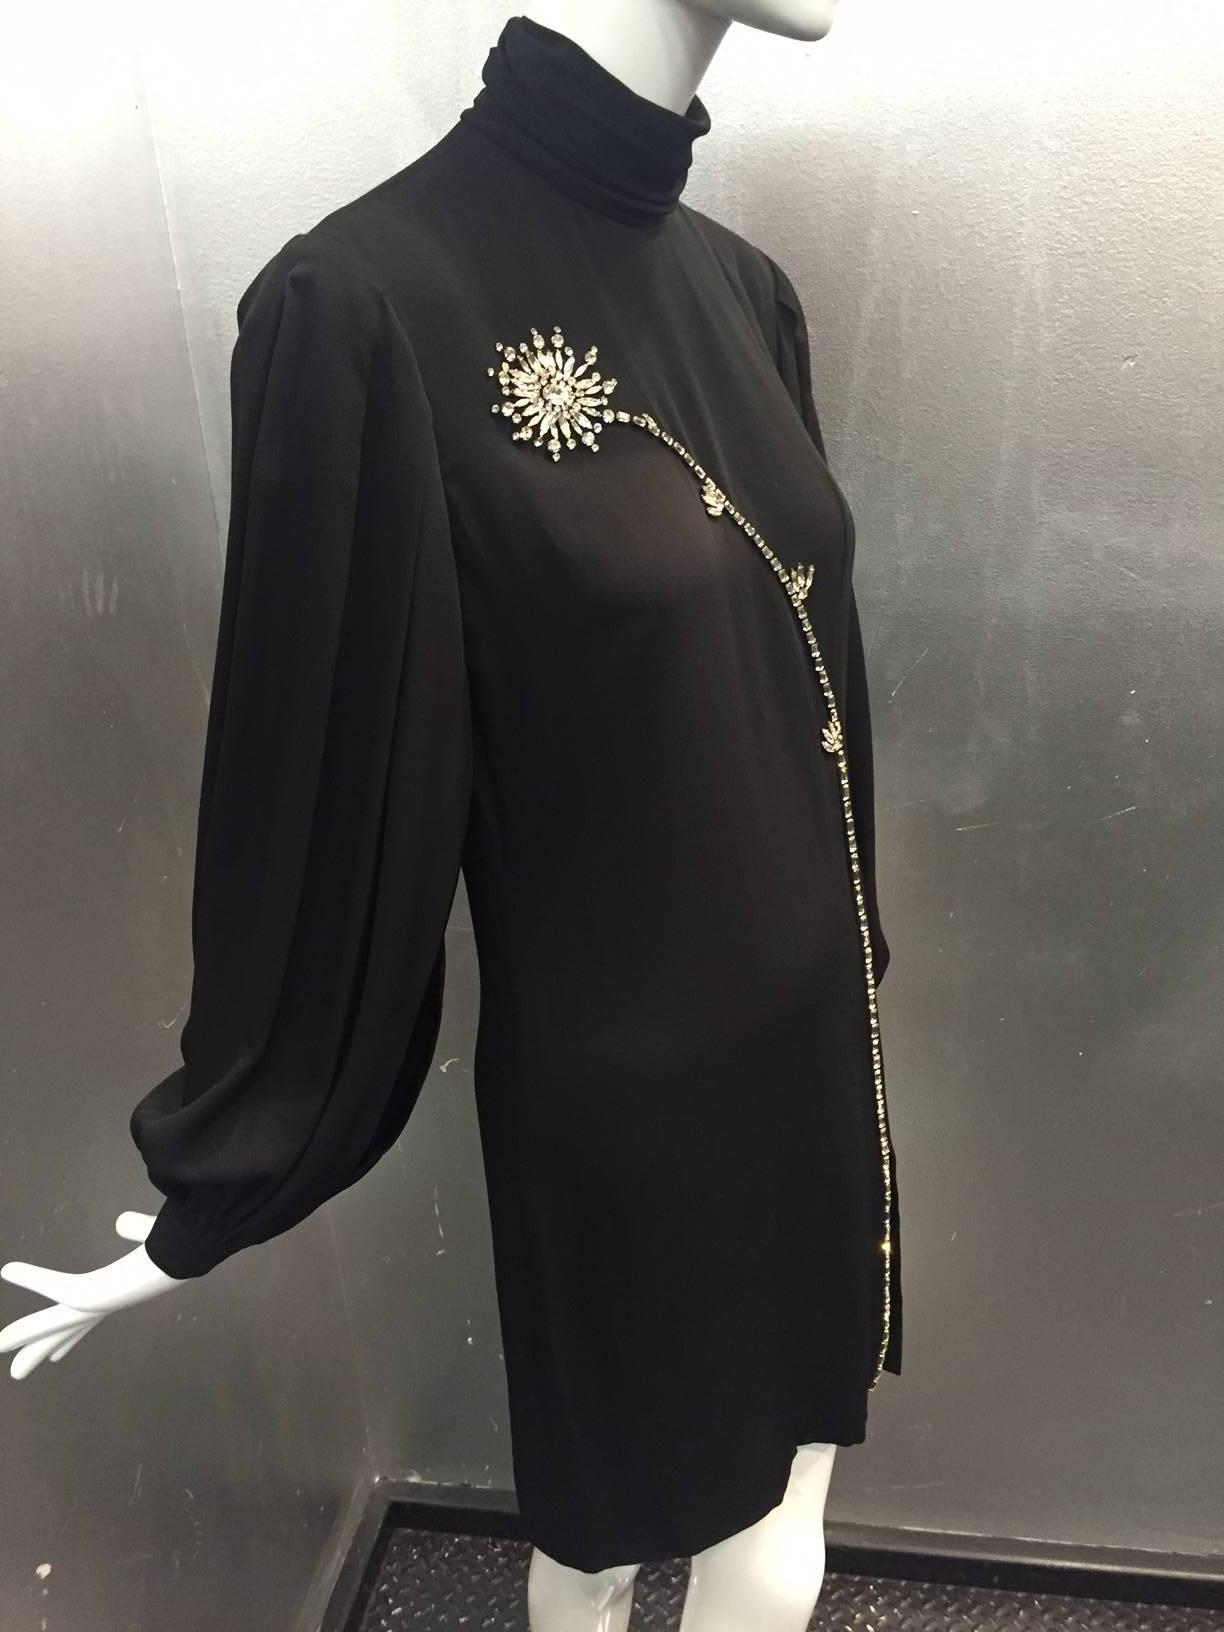 1980s James Galanos black silk crepe mini dress: Funnel neck with back button closure, back zipper.  Pleated shoulder and balloon sleeves. Front side slit is daring with a long stemmed rhinestone flower in front.